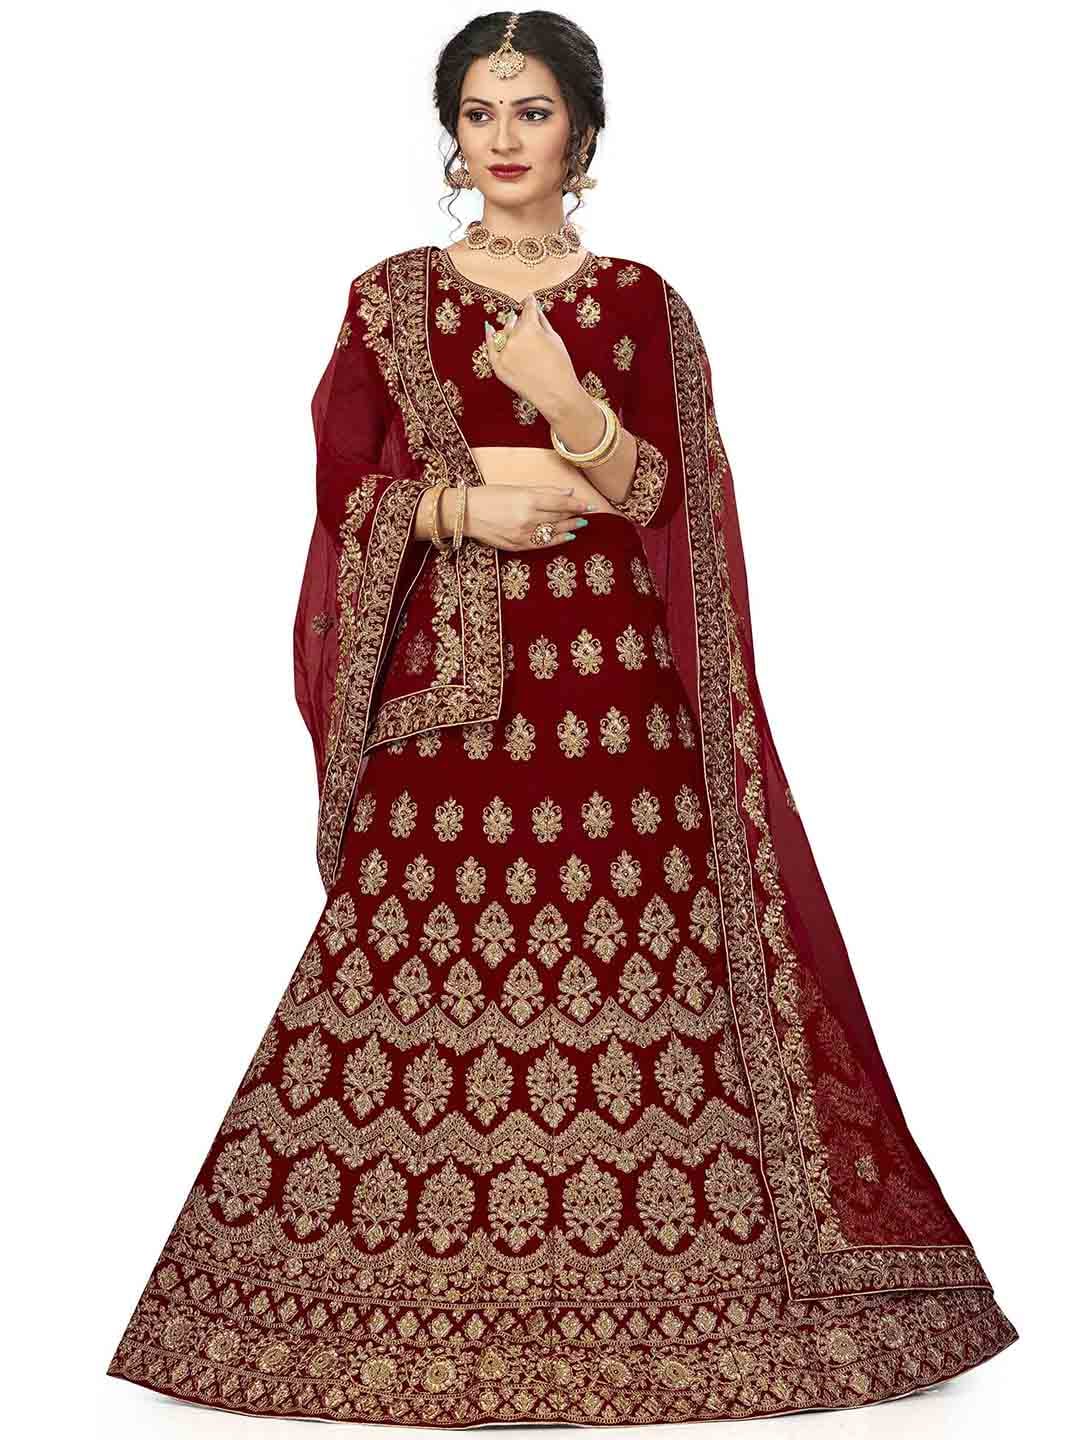 MANVAA Embroidered Velvet Semi-Stitched Lehenga & Unstitched Blouse With Dupatta Price in India